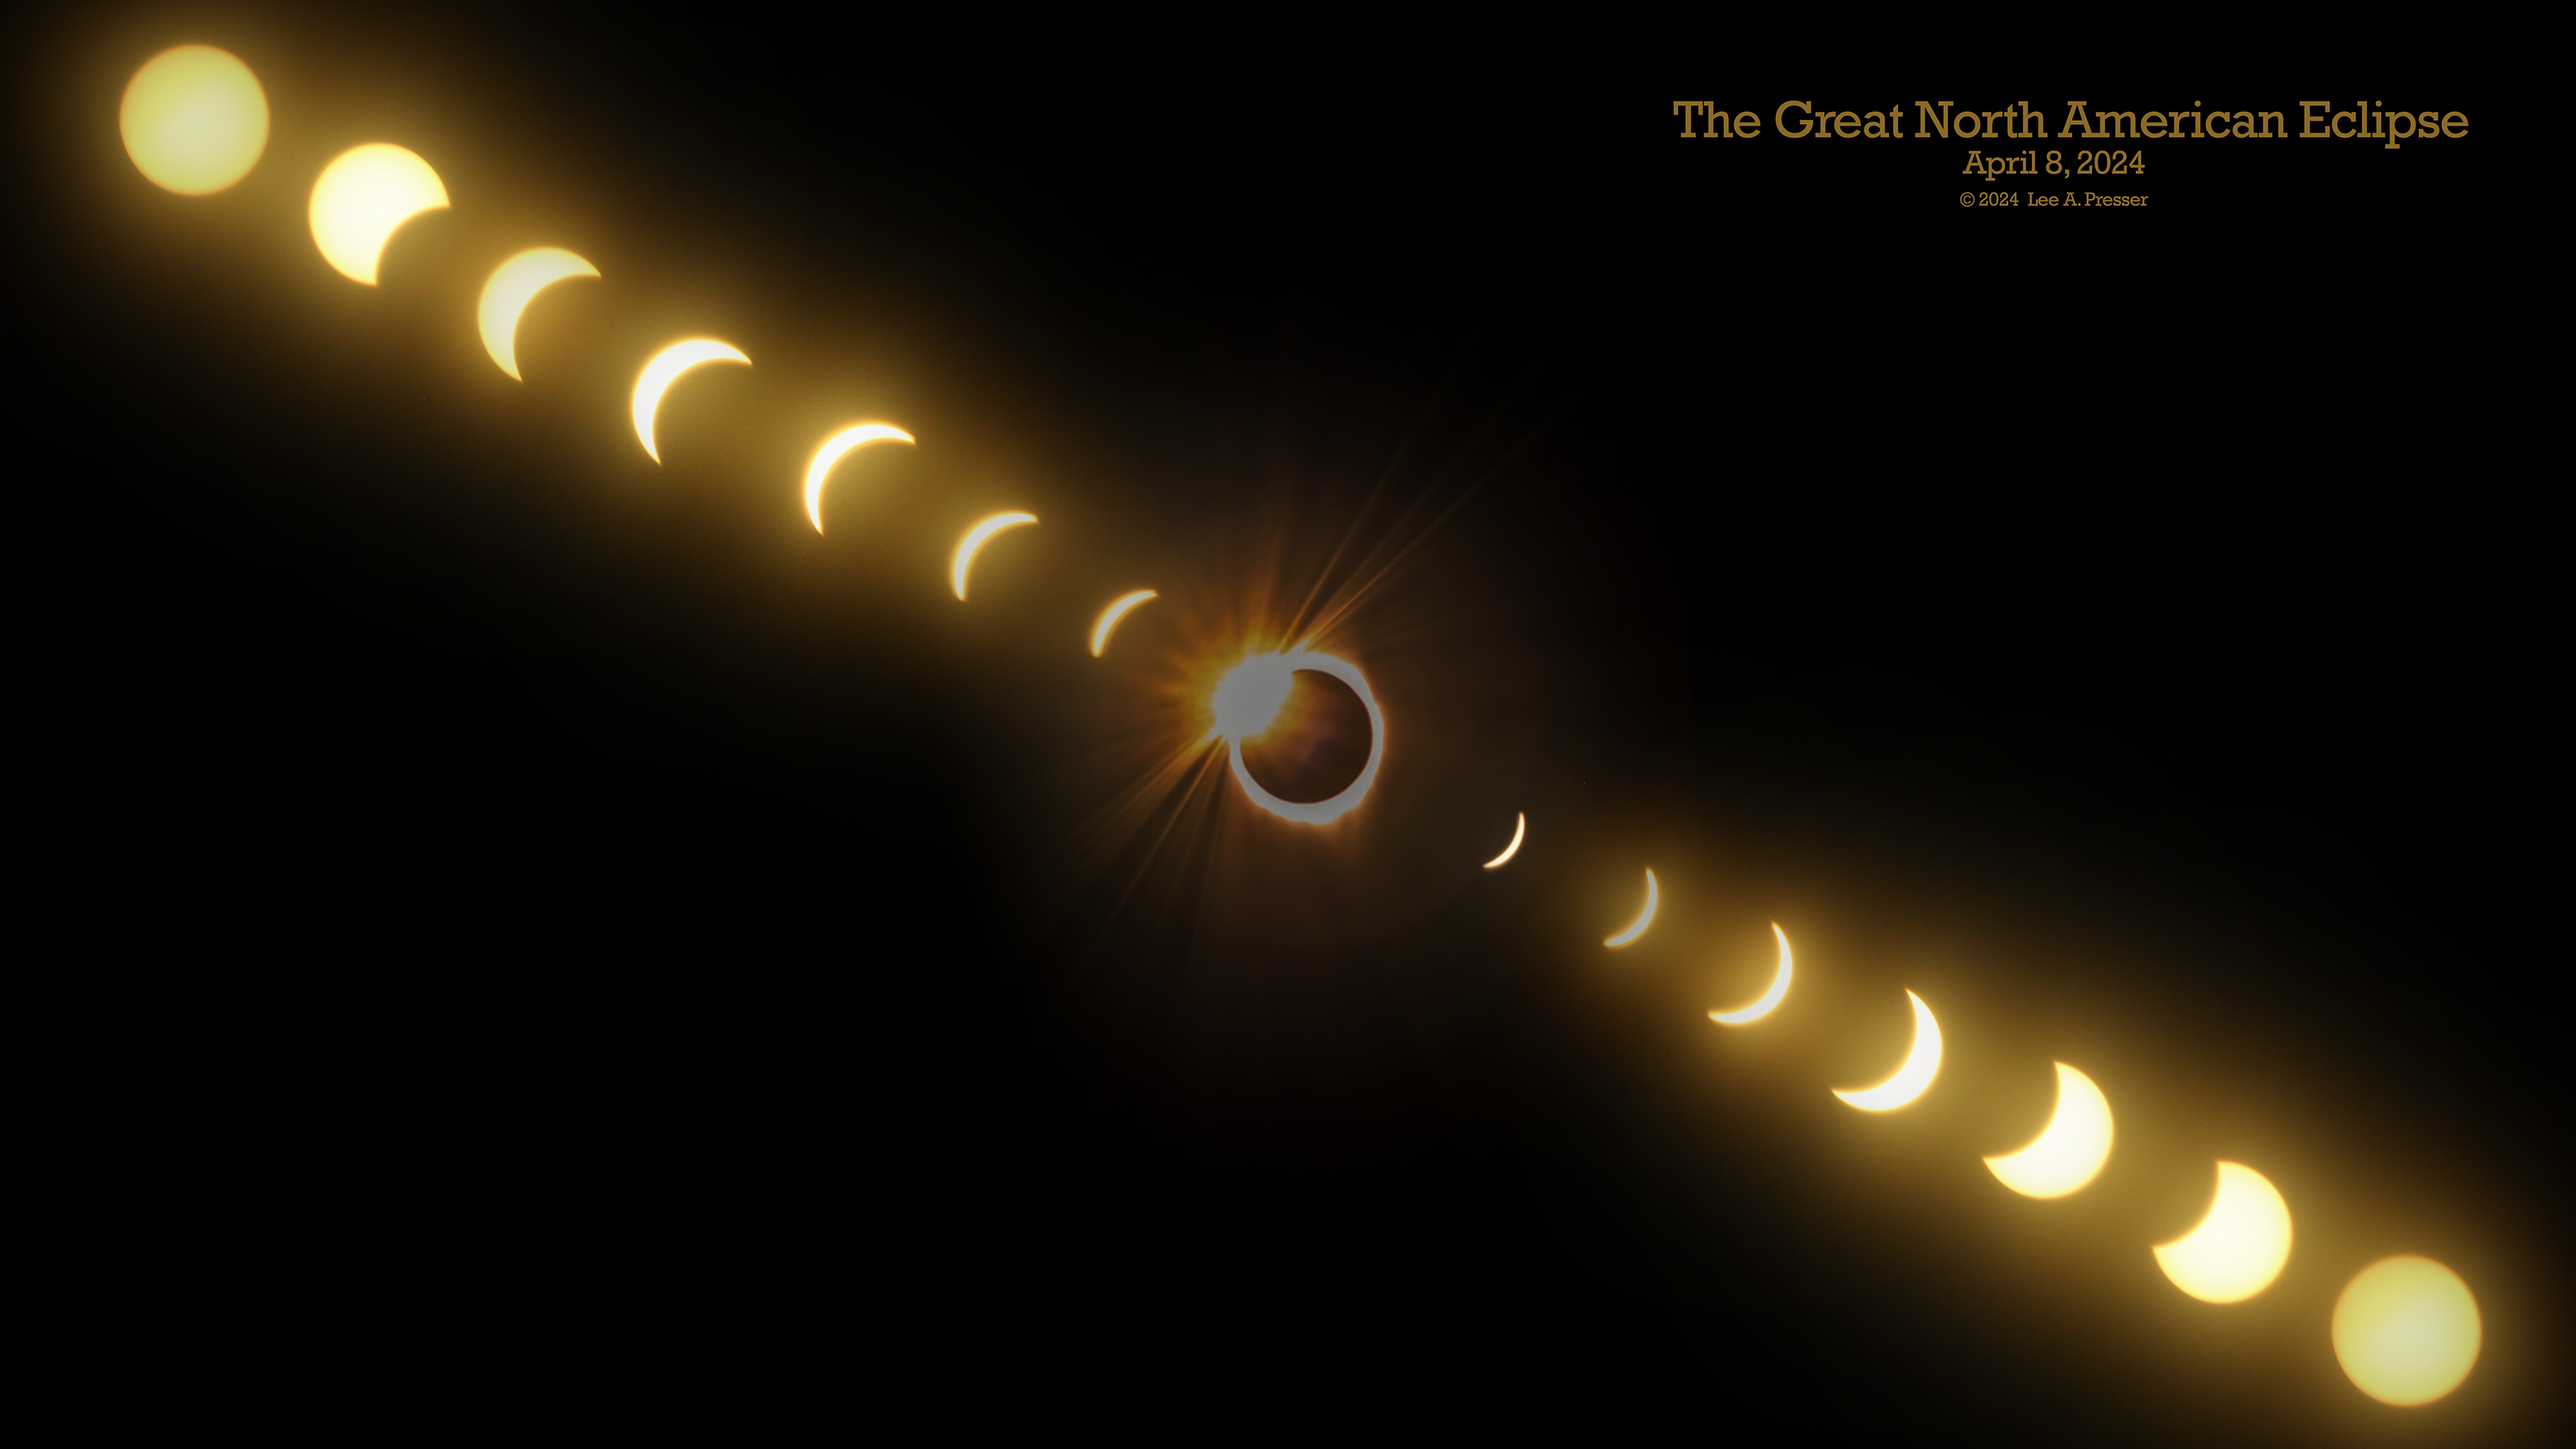 The Great North American Eclipse of 2024